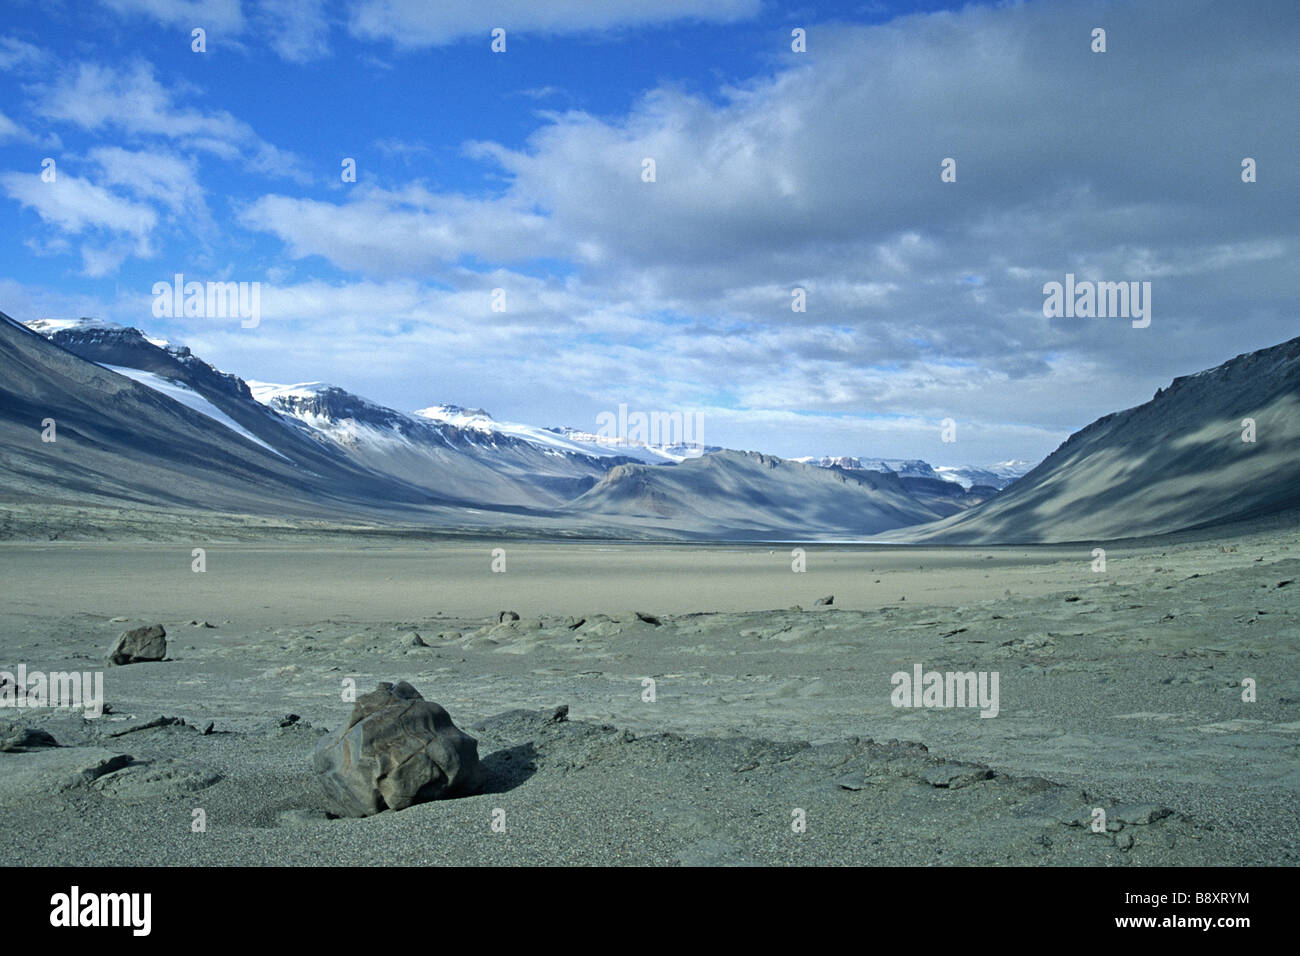 The desert like floor of the Wright Valley in the McMurdo Dry Valley region of Antarctica. Stock Photo